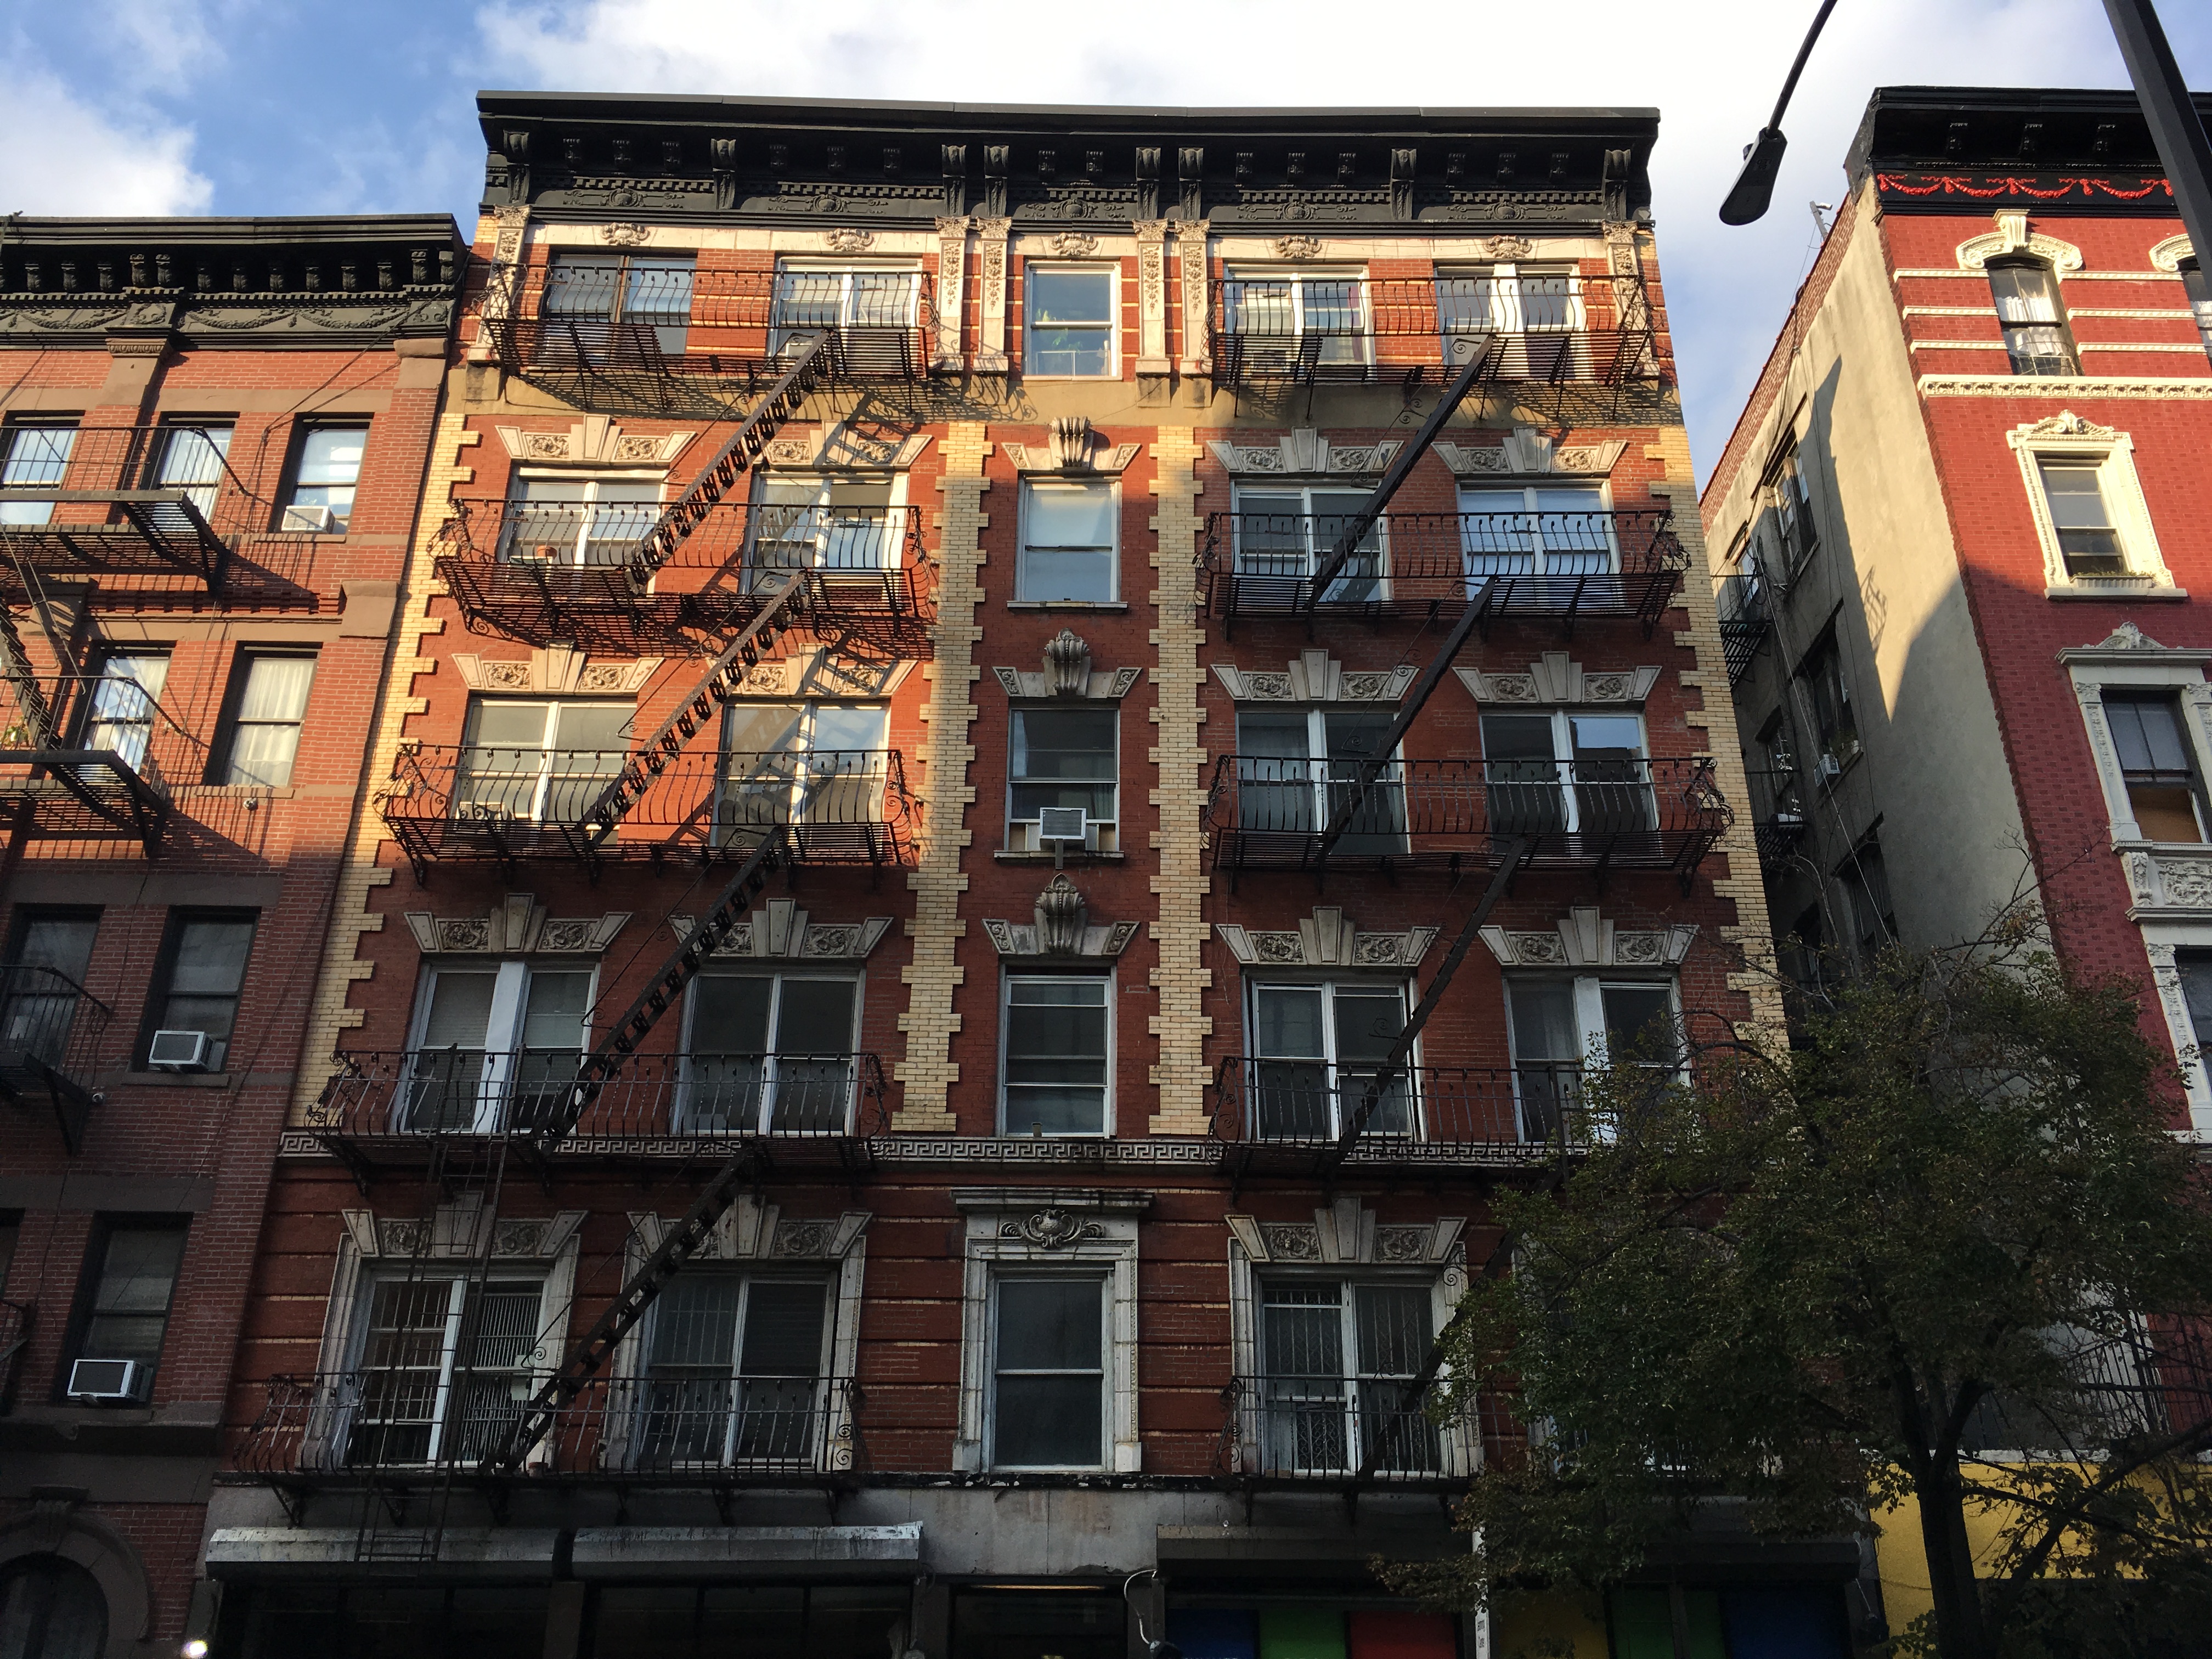 Image of Allen Ginsberg's old apartment building.